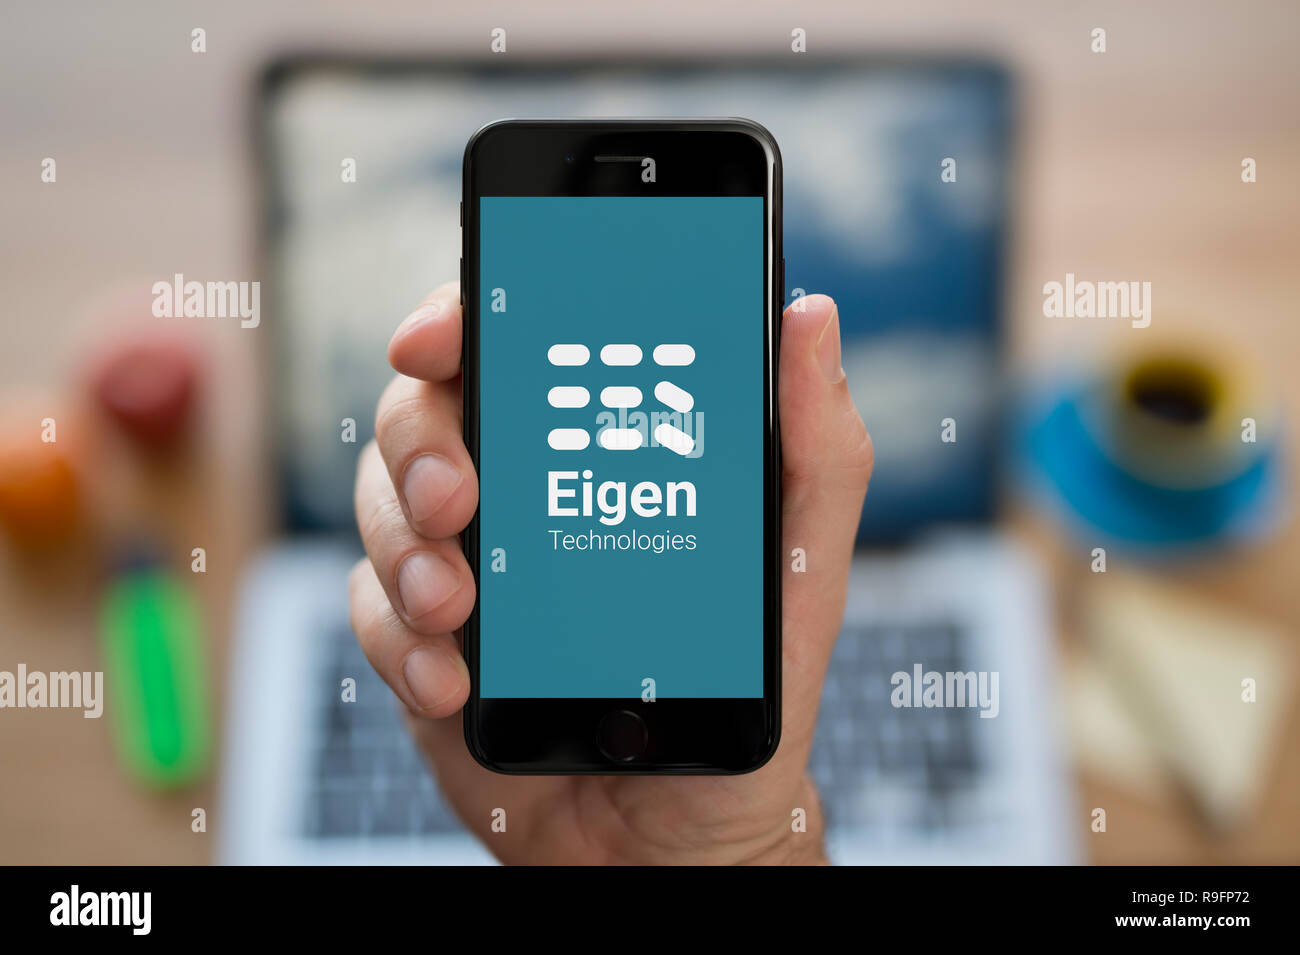 A man looks at his iPhone which displays the Eigen Technologies logo (Editorial use only). Stock Photo